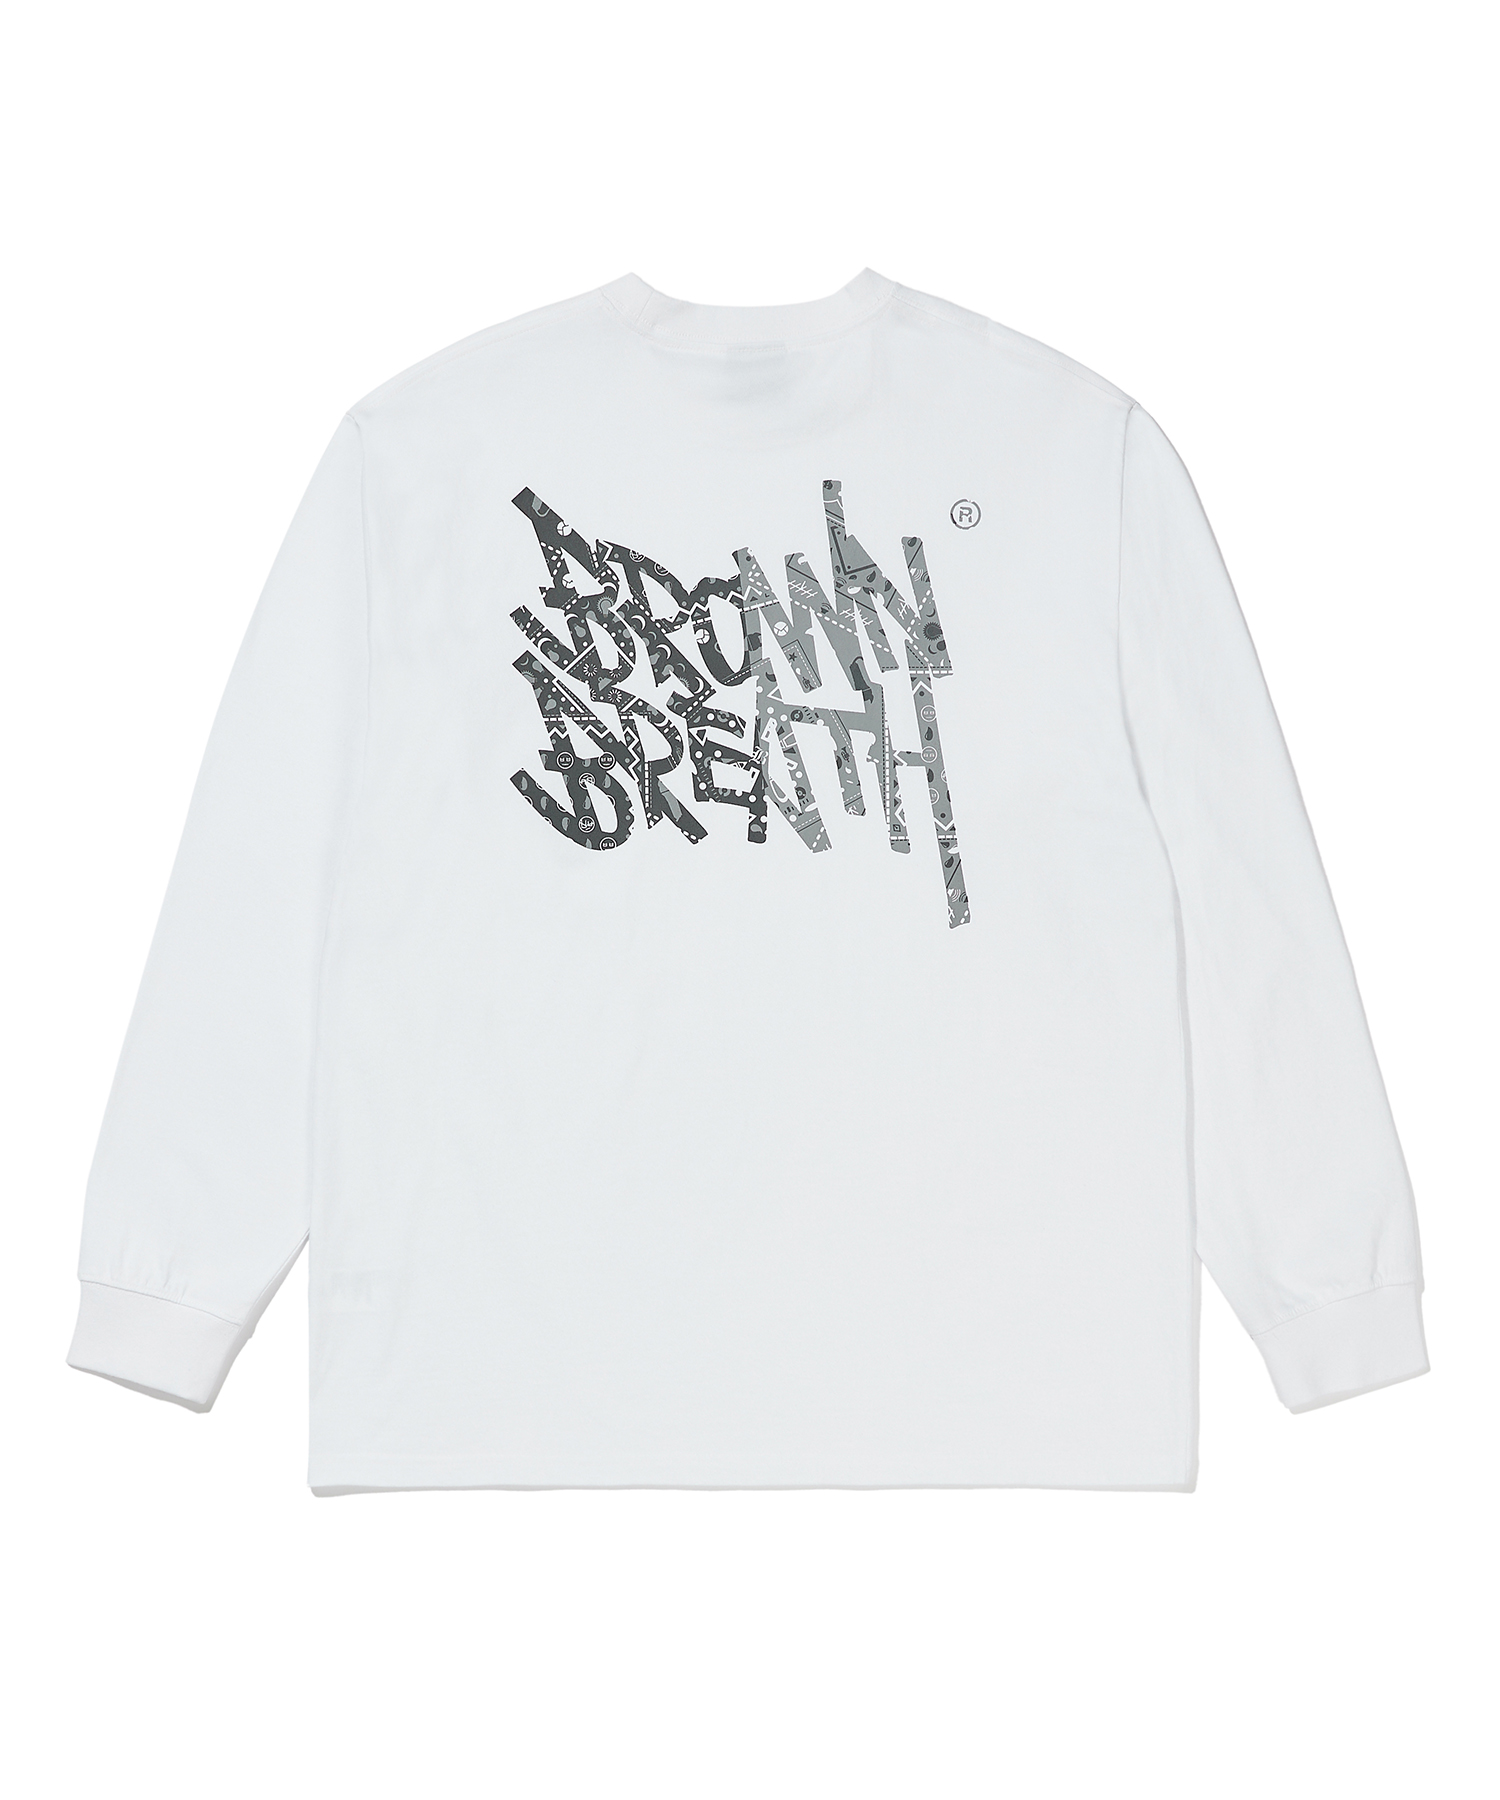 [ONLINE EXCLUSIVE] PAISLEY TAG LONGSLEEVE - WHITE